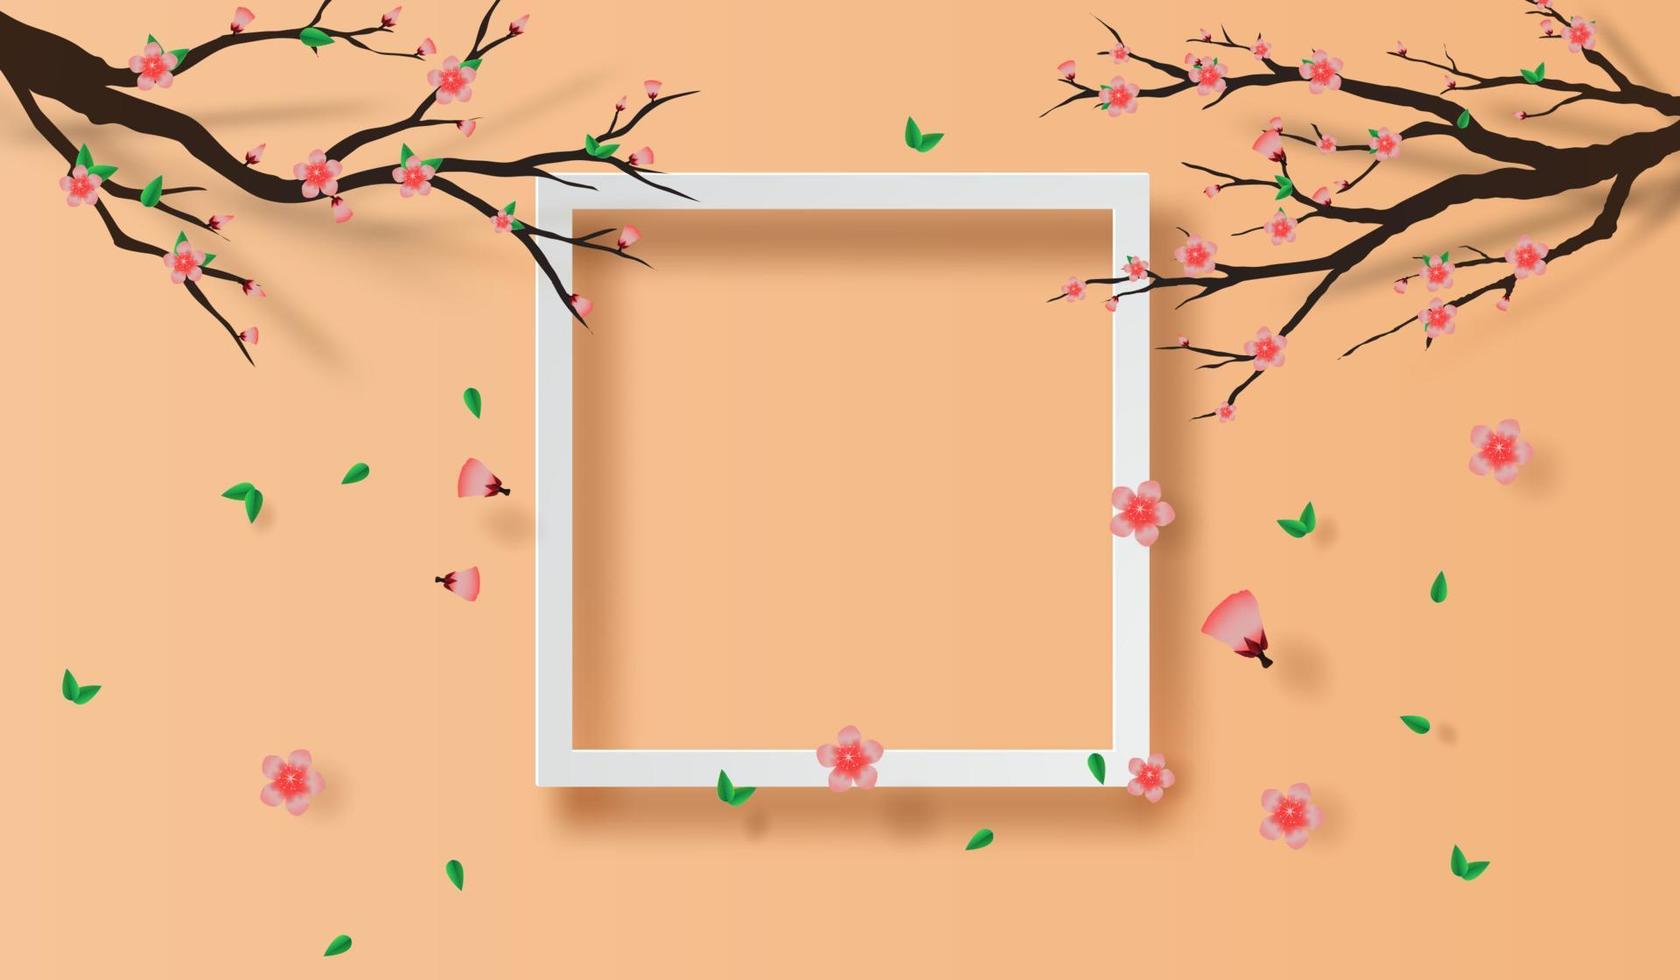 illustration of paper art and craft frame spring season cherry blossom concept,Springtime with sakura branch, Floral Cherry blossom with pink flowers on place text space background,Paper cut vector. vector